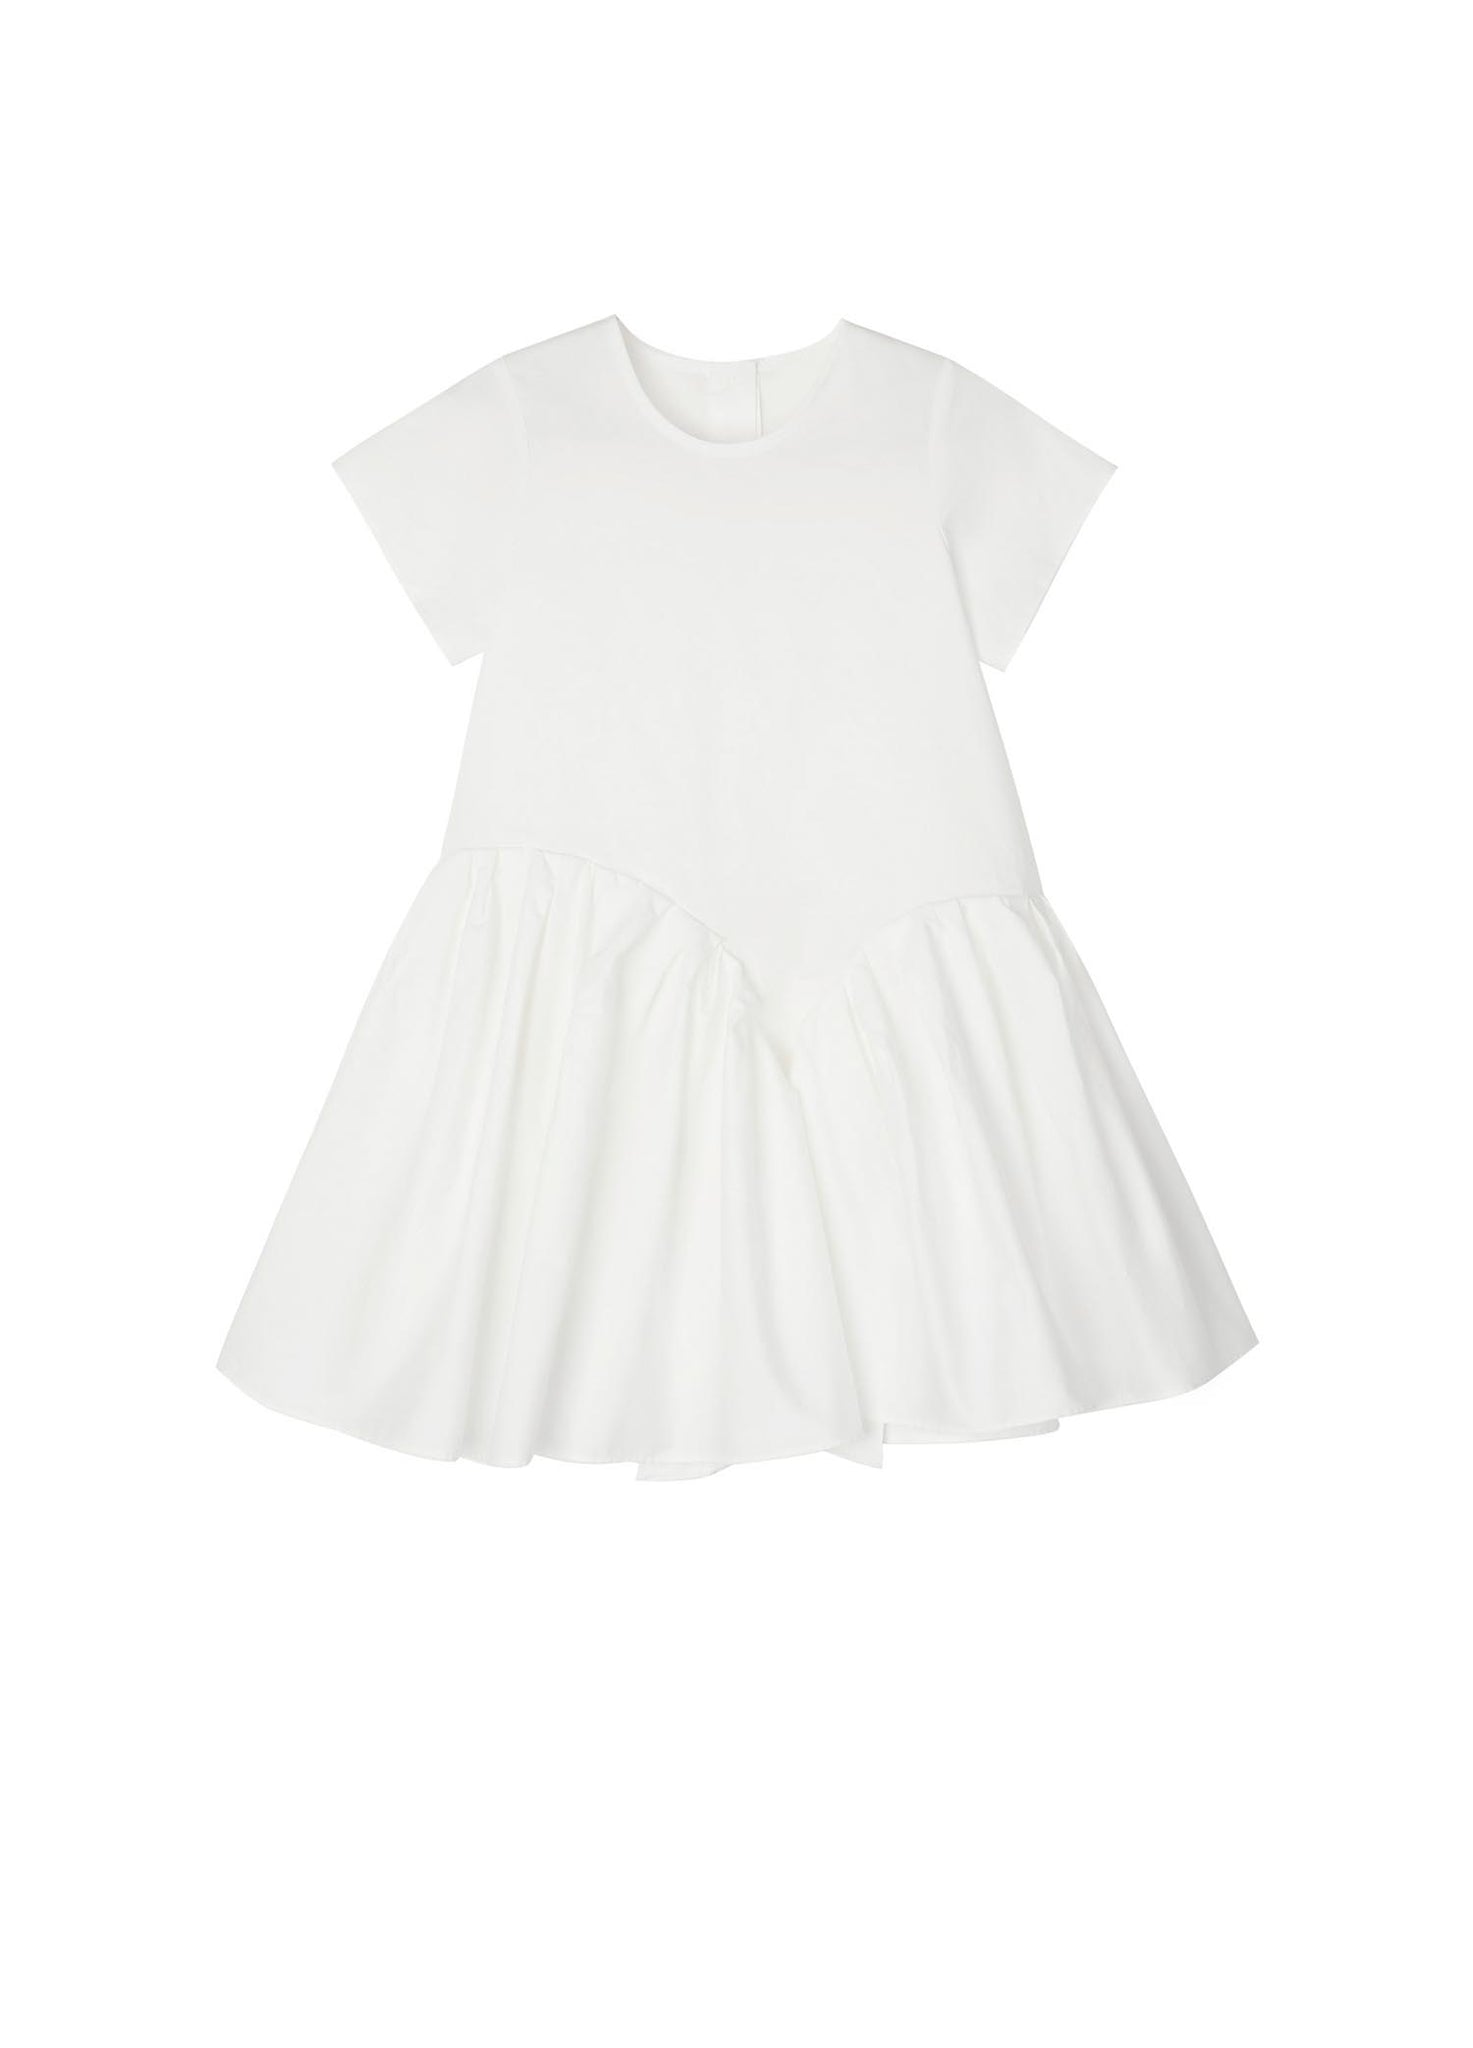 Dress / jnby by JNBY Solid A-Line Short Sleeve Dress